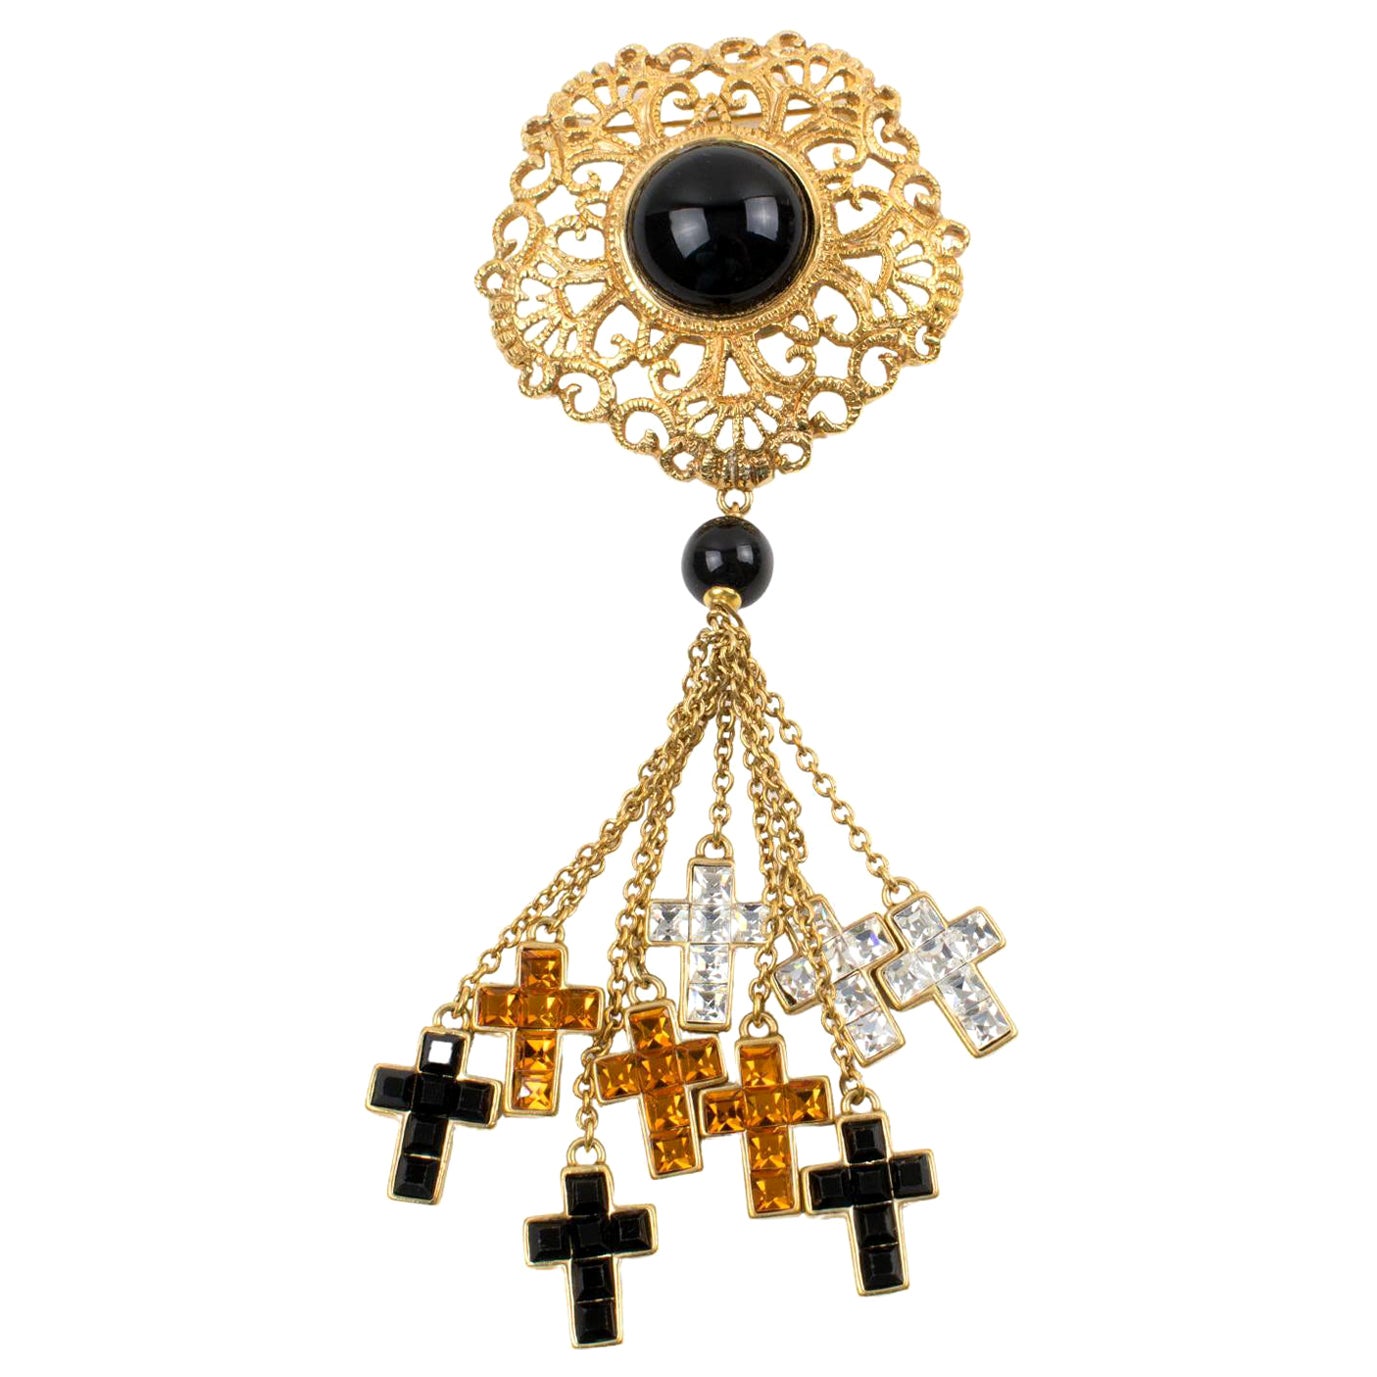 Valentino Black and Orange Jeweled Pin Brooch Dangling Cross Charms For Sale